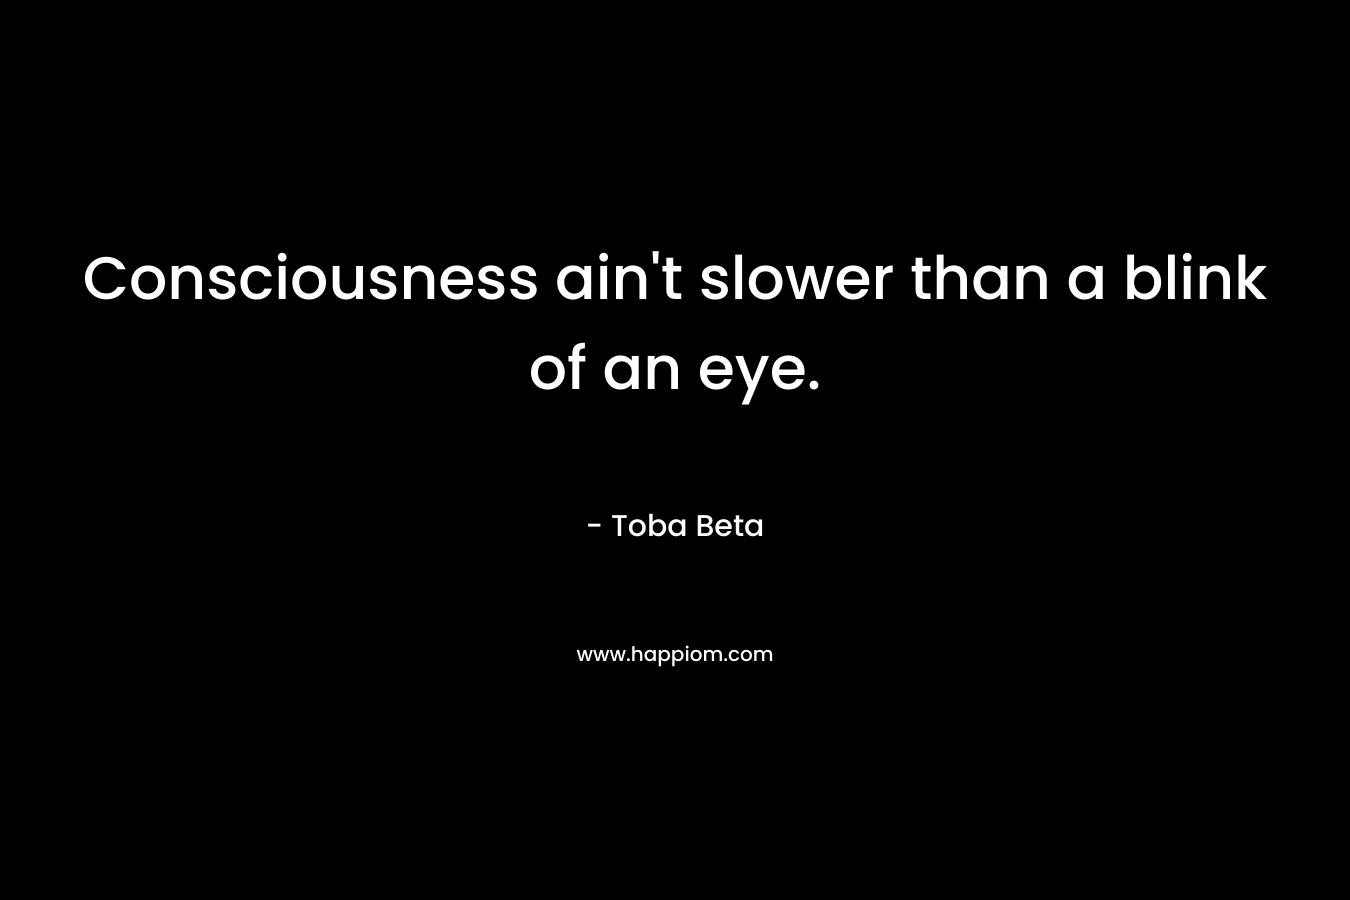 Consciousness ain't slower than a blink of an eye.